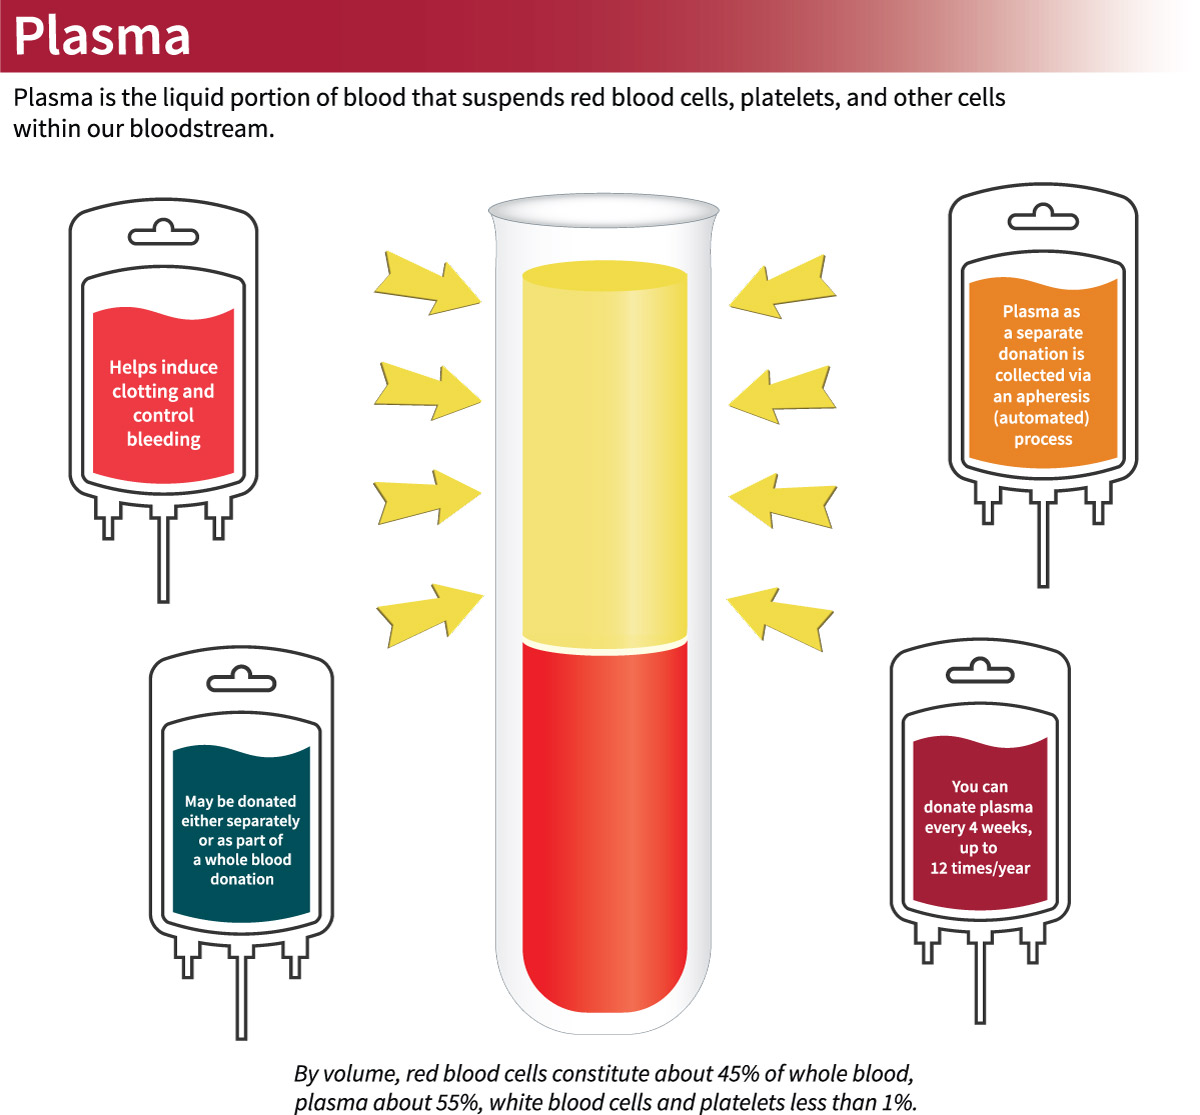 how often can you donate plasma